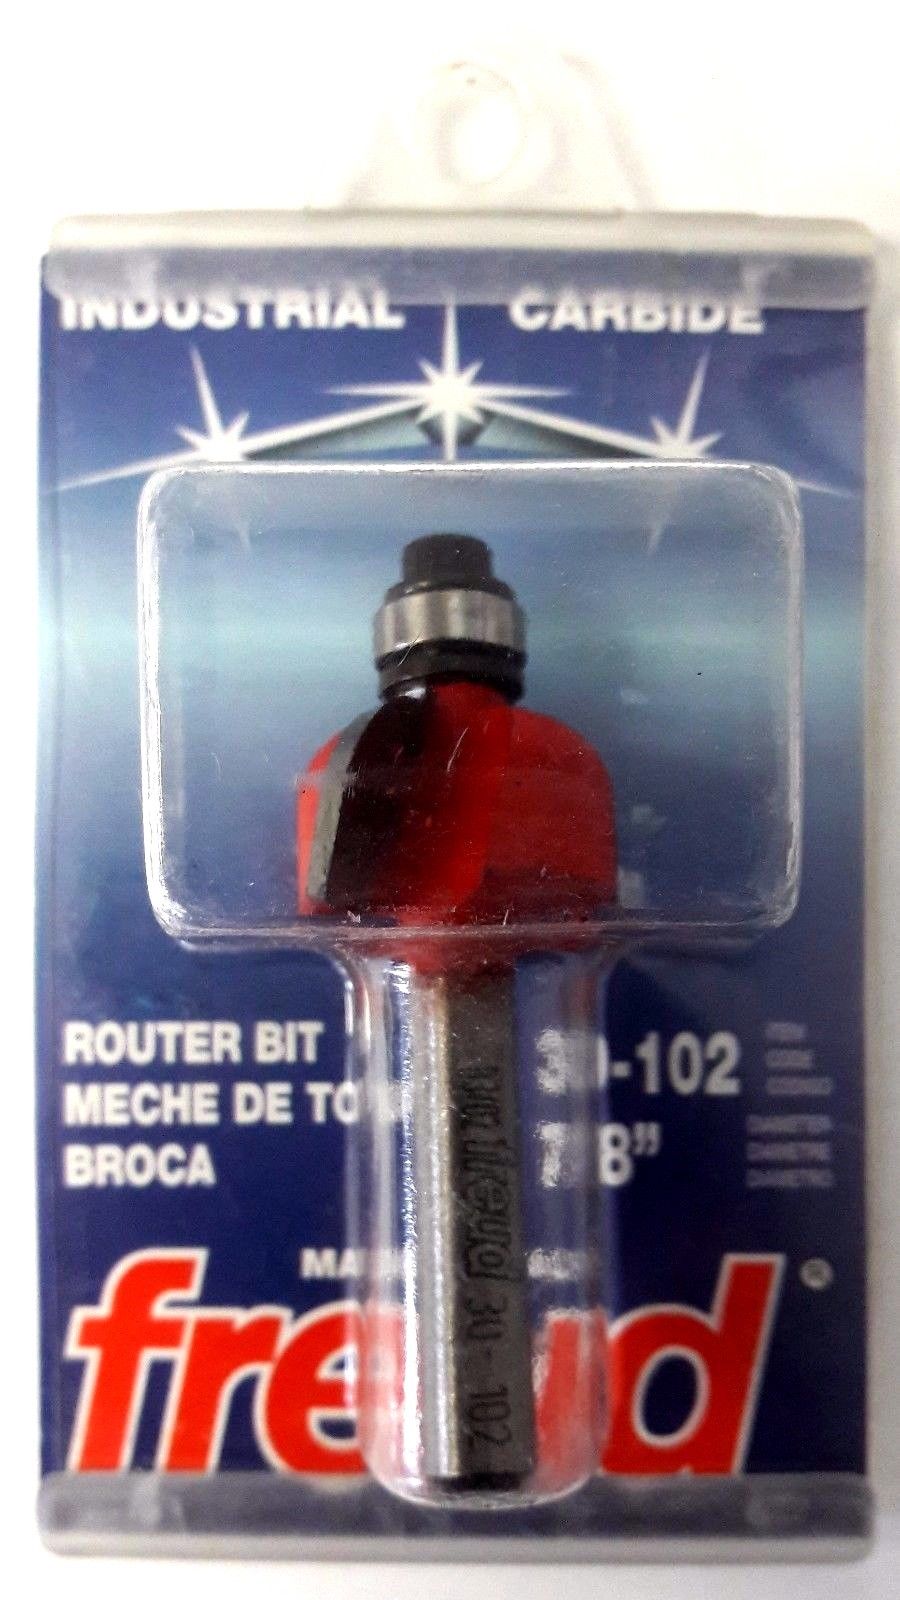 Freud 30-102 1/4" Radius Cove Router Bit With 1/4" Shank Italy